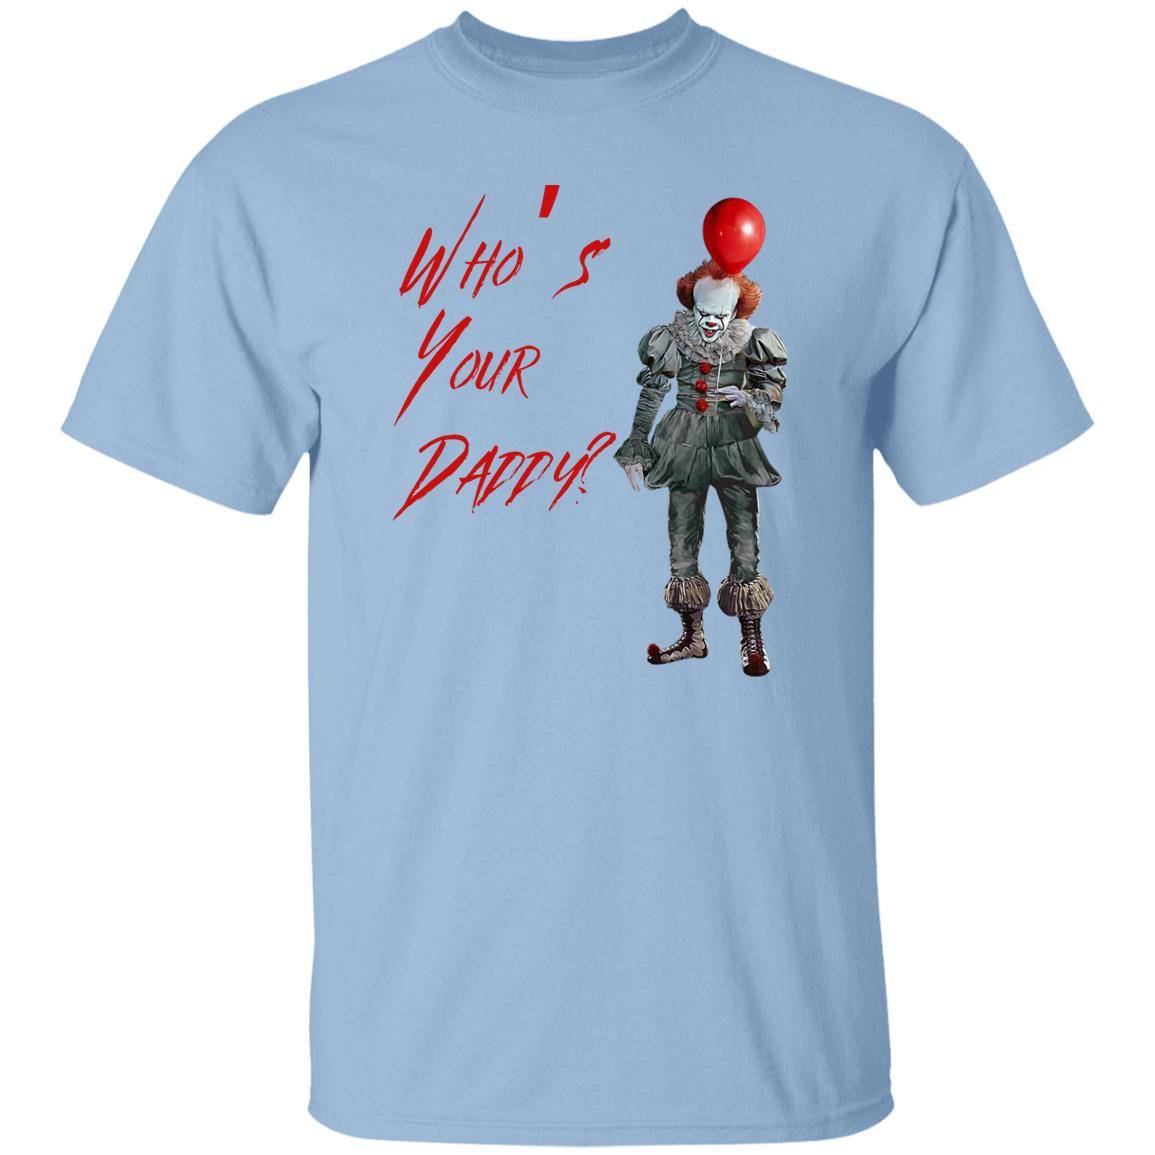 Who's Your Daddy Slasher Halloween T-Shirt - Any Gift For You